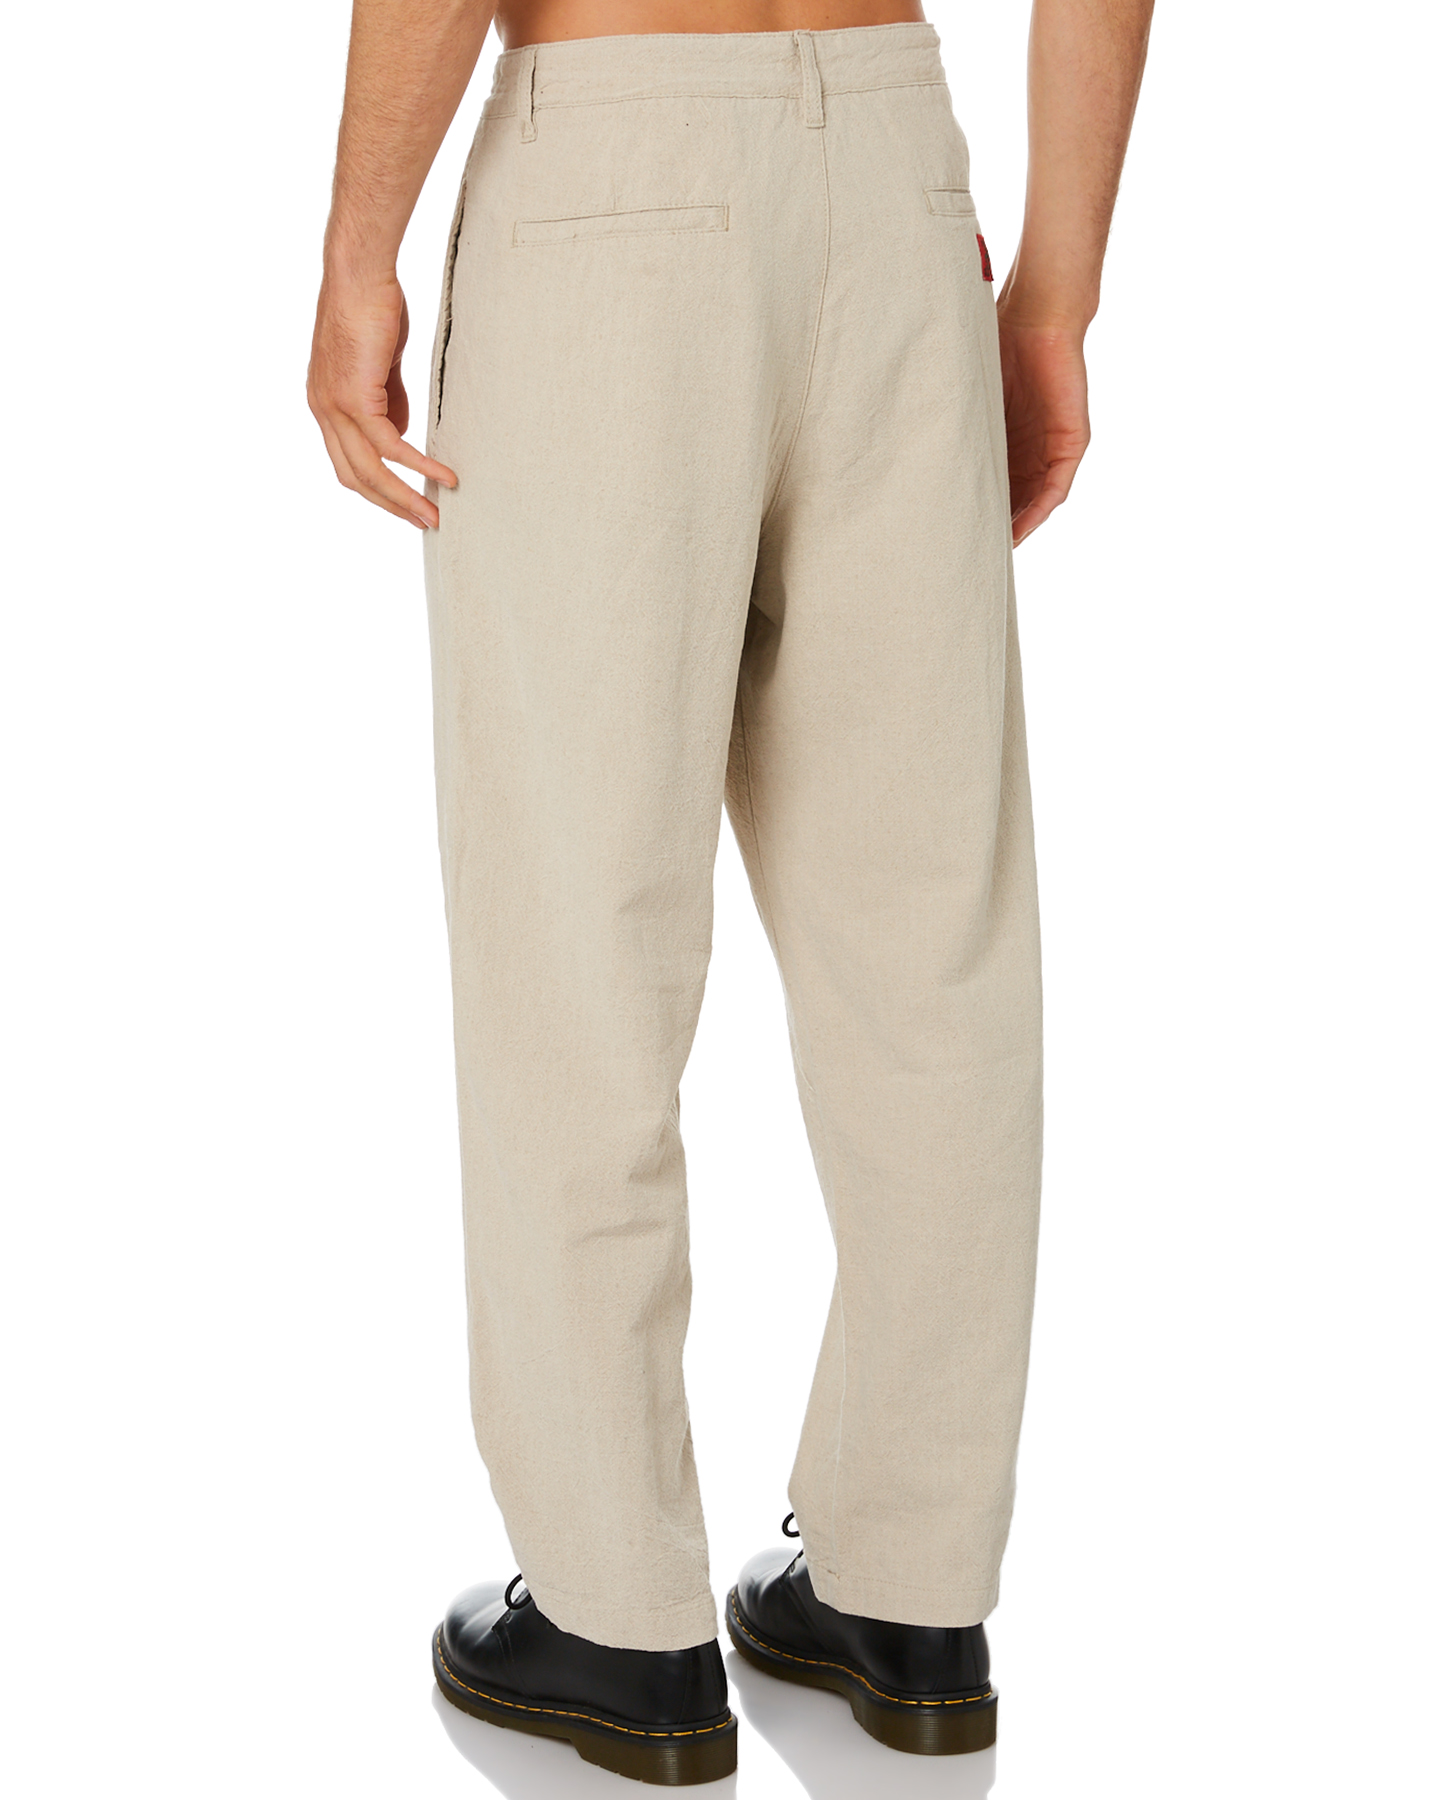 Misfit Greetings Linen Mens Pant - Off White | SurfStitch